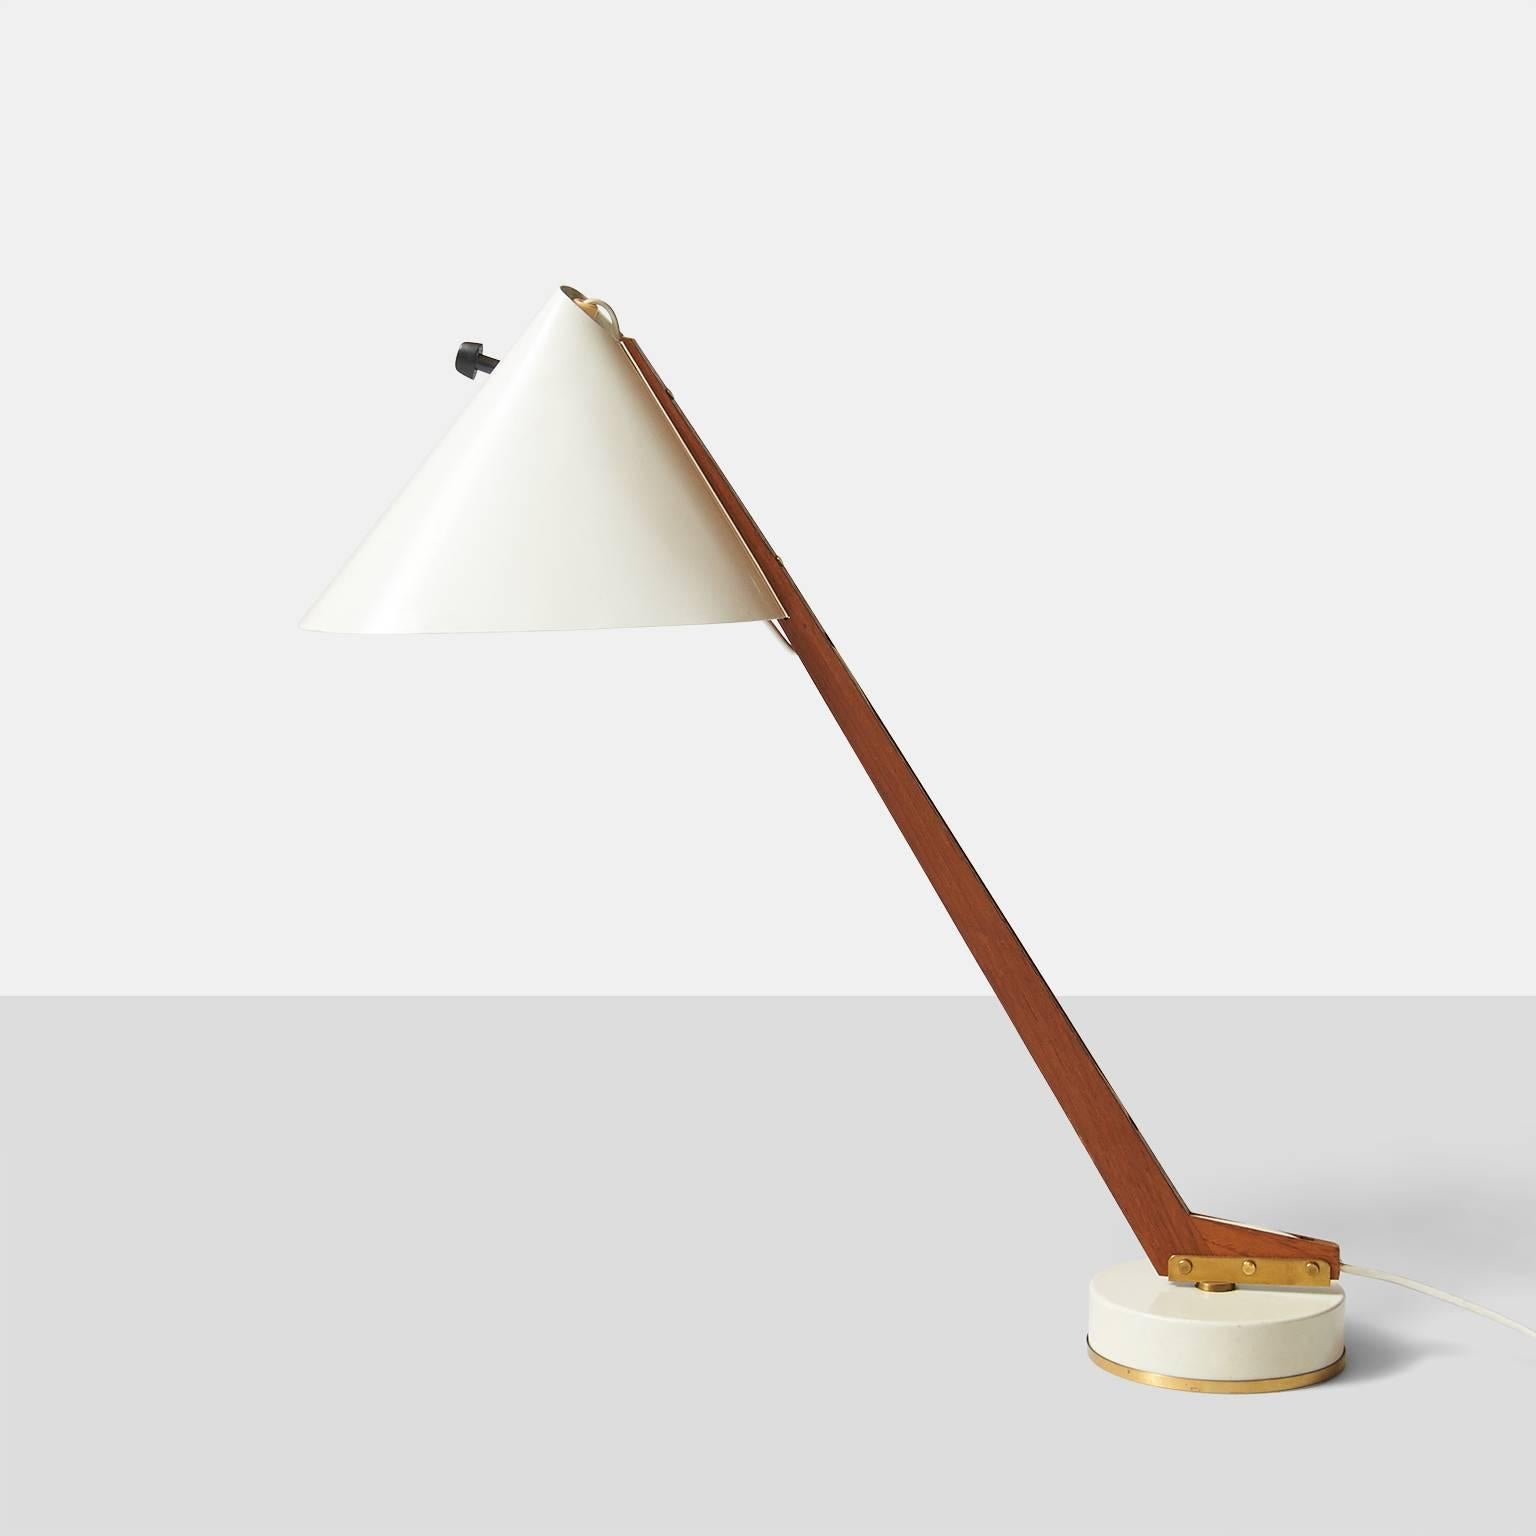 A published desk lamp model B54 by Swedish designer Hans-Agne Jakobsson. White metal base and shade with brass trim and a rotating teak stem. The cord is exposed and recessed into the wood stem. The lamp retains the original label H-A Jakobsson